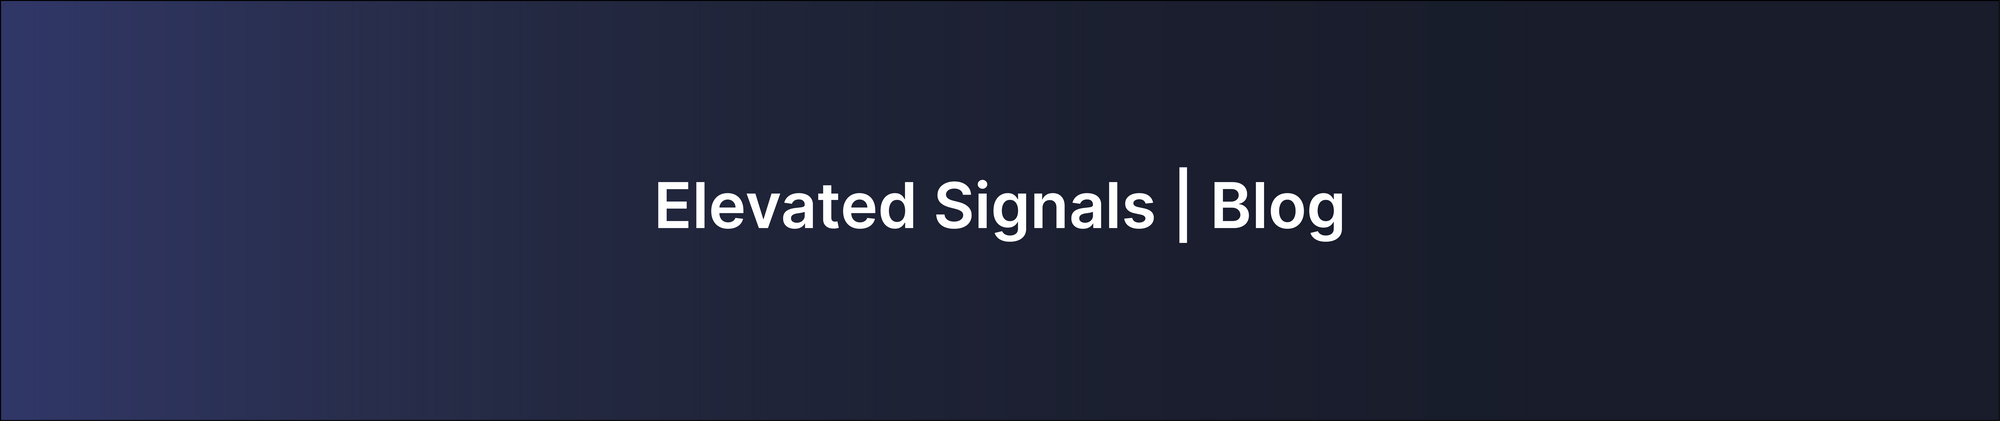 Elevated Signals Blog | Cannabis Manufacturing Software